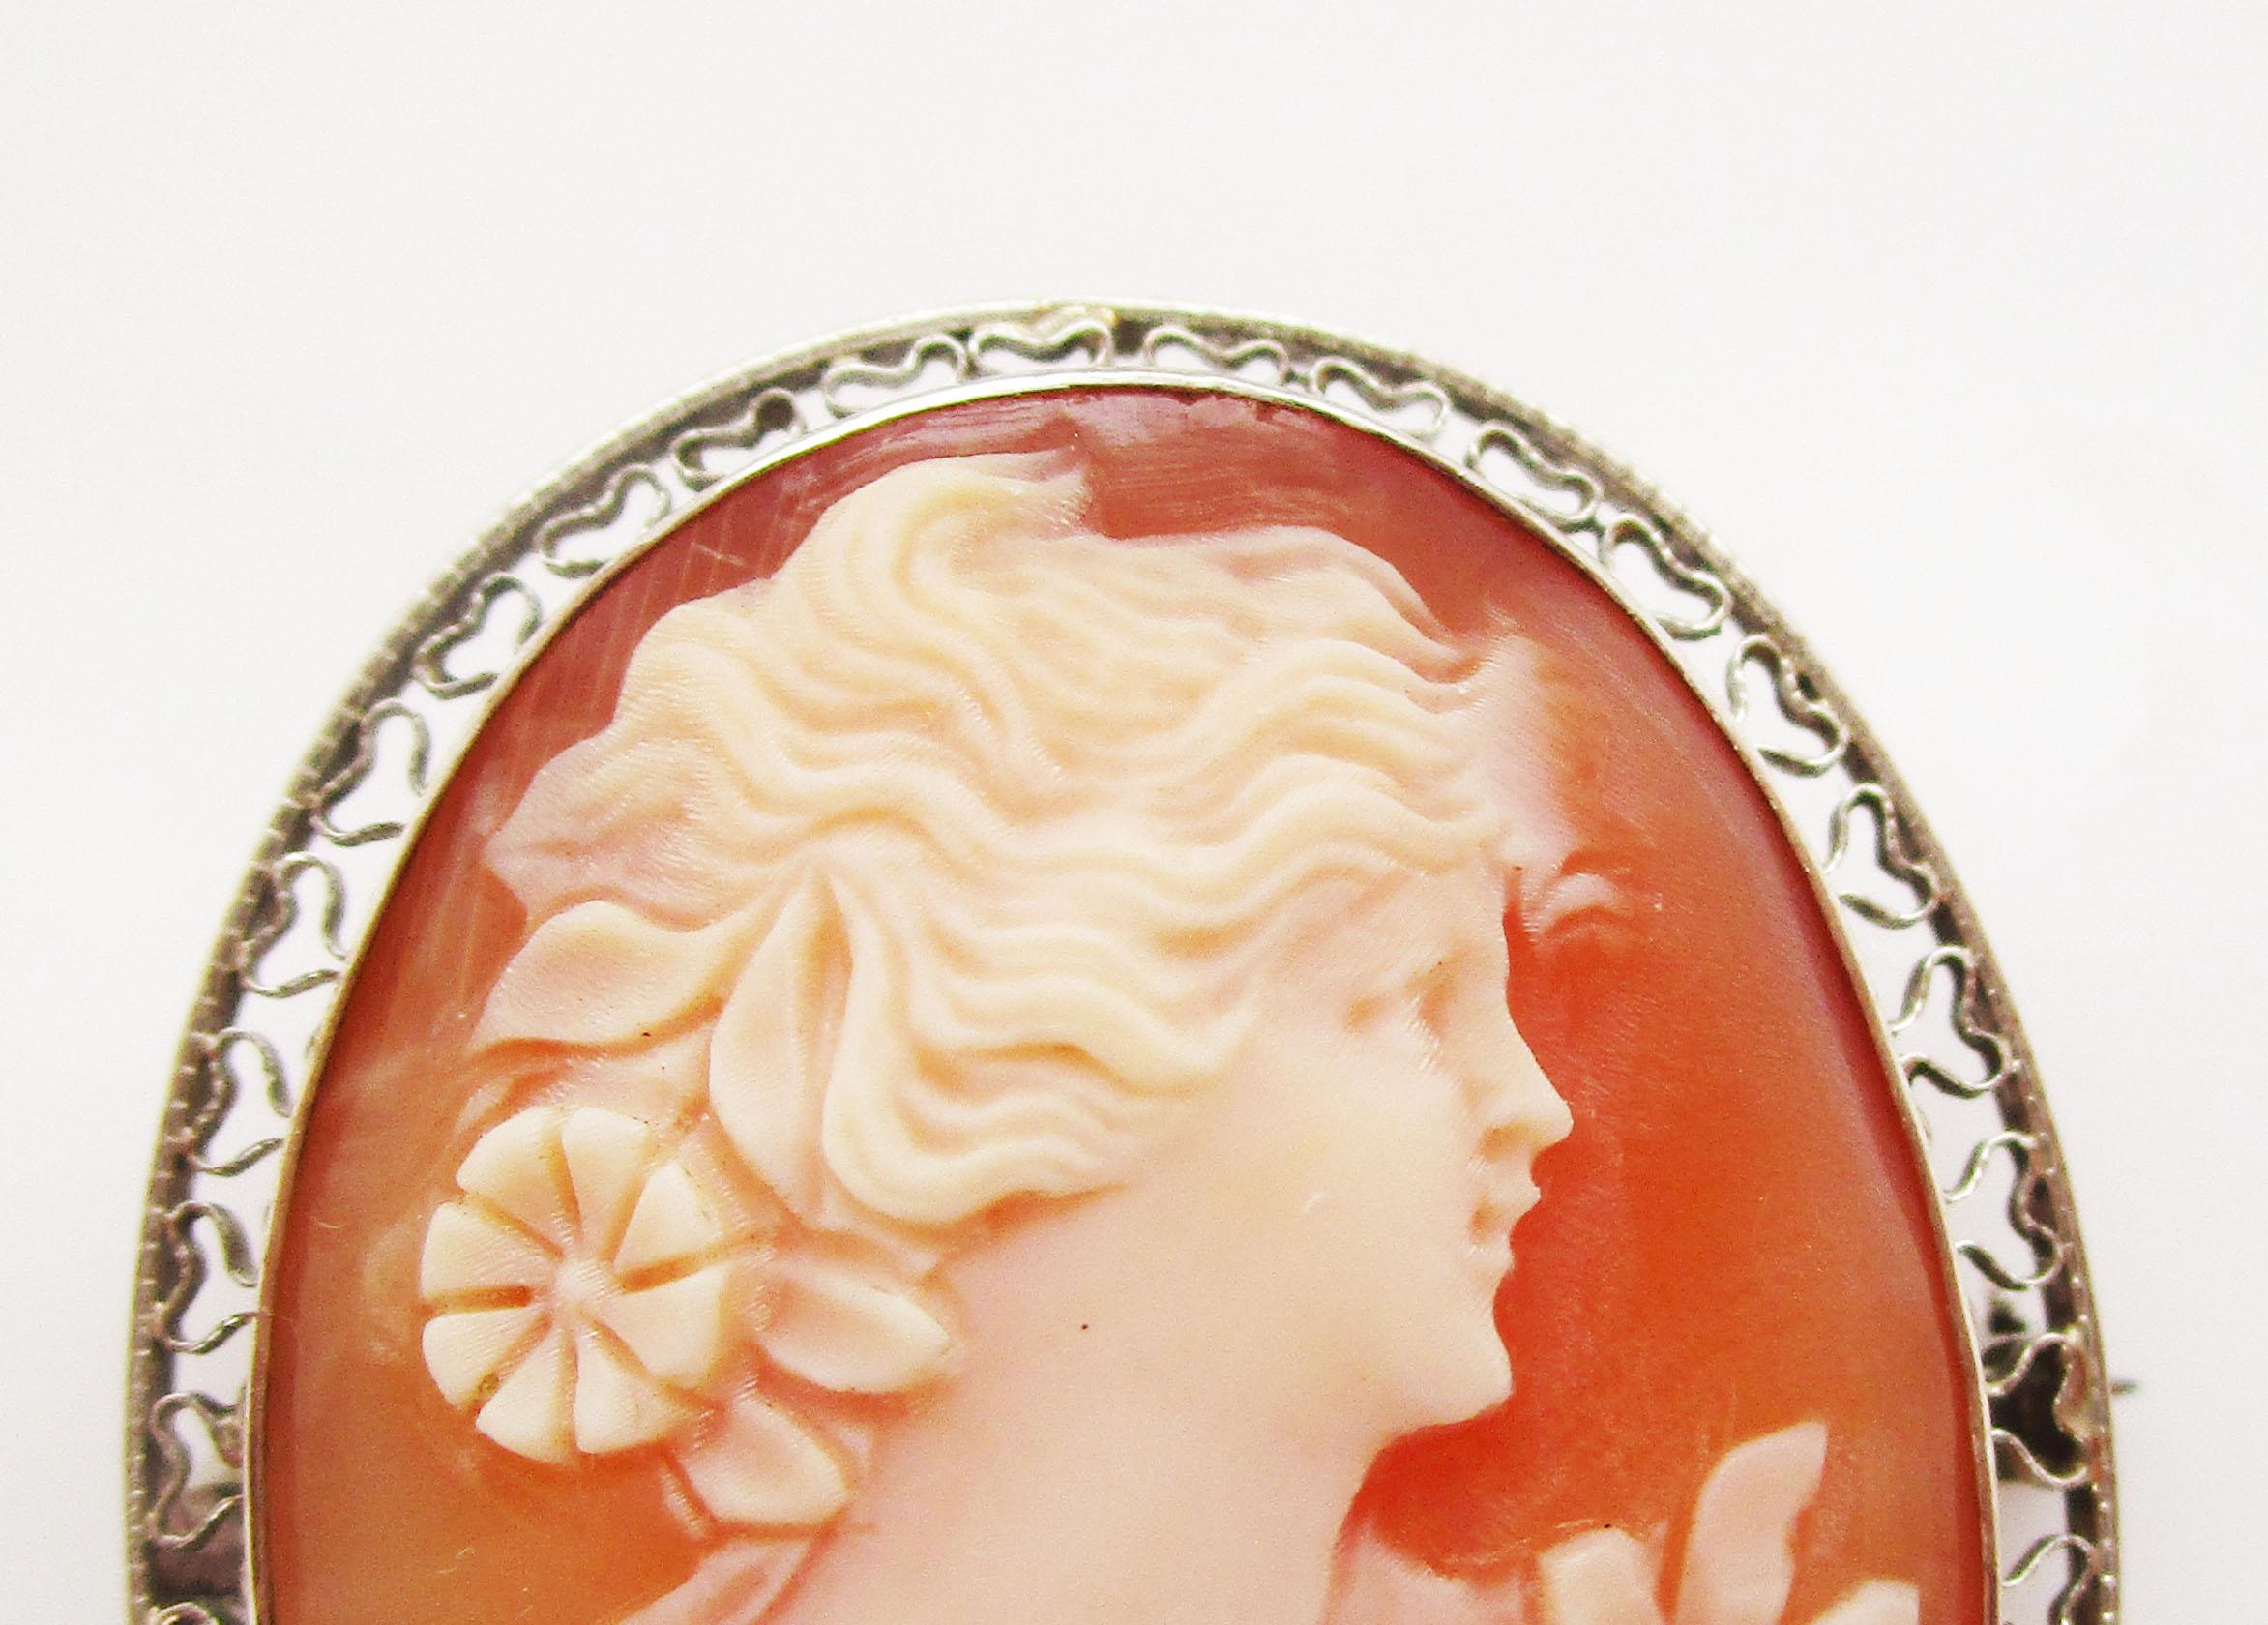 This is a gorgeous Edwardian three-color shell cameo set into a stunning 10k white gold frame with a lace-like detailing. The carving is absolutely beautiful, featuring the right facing portrait of an elegant Edwardian woman adorned with flowers.